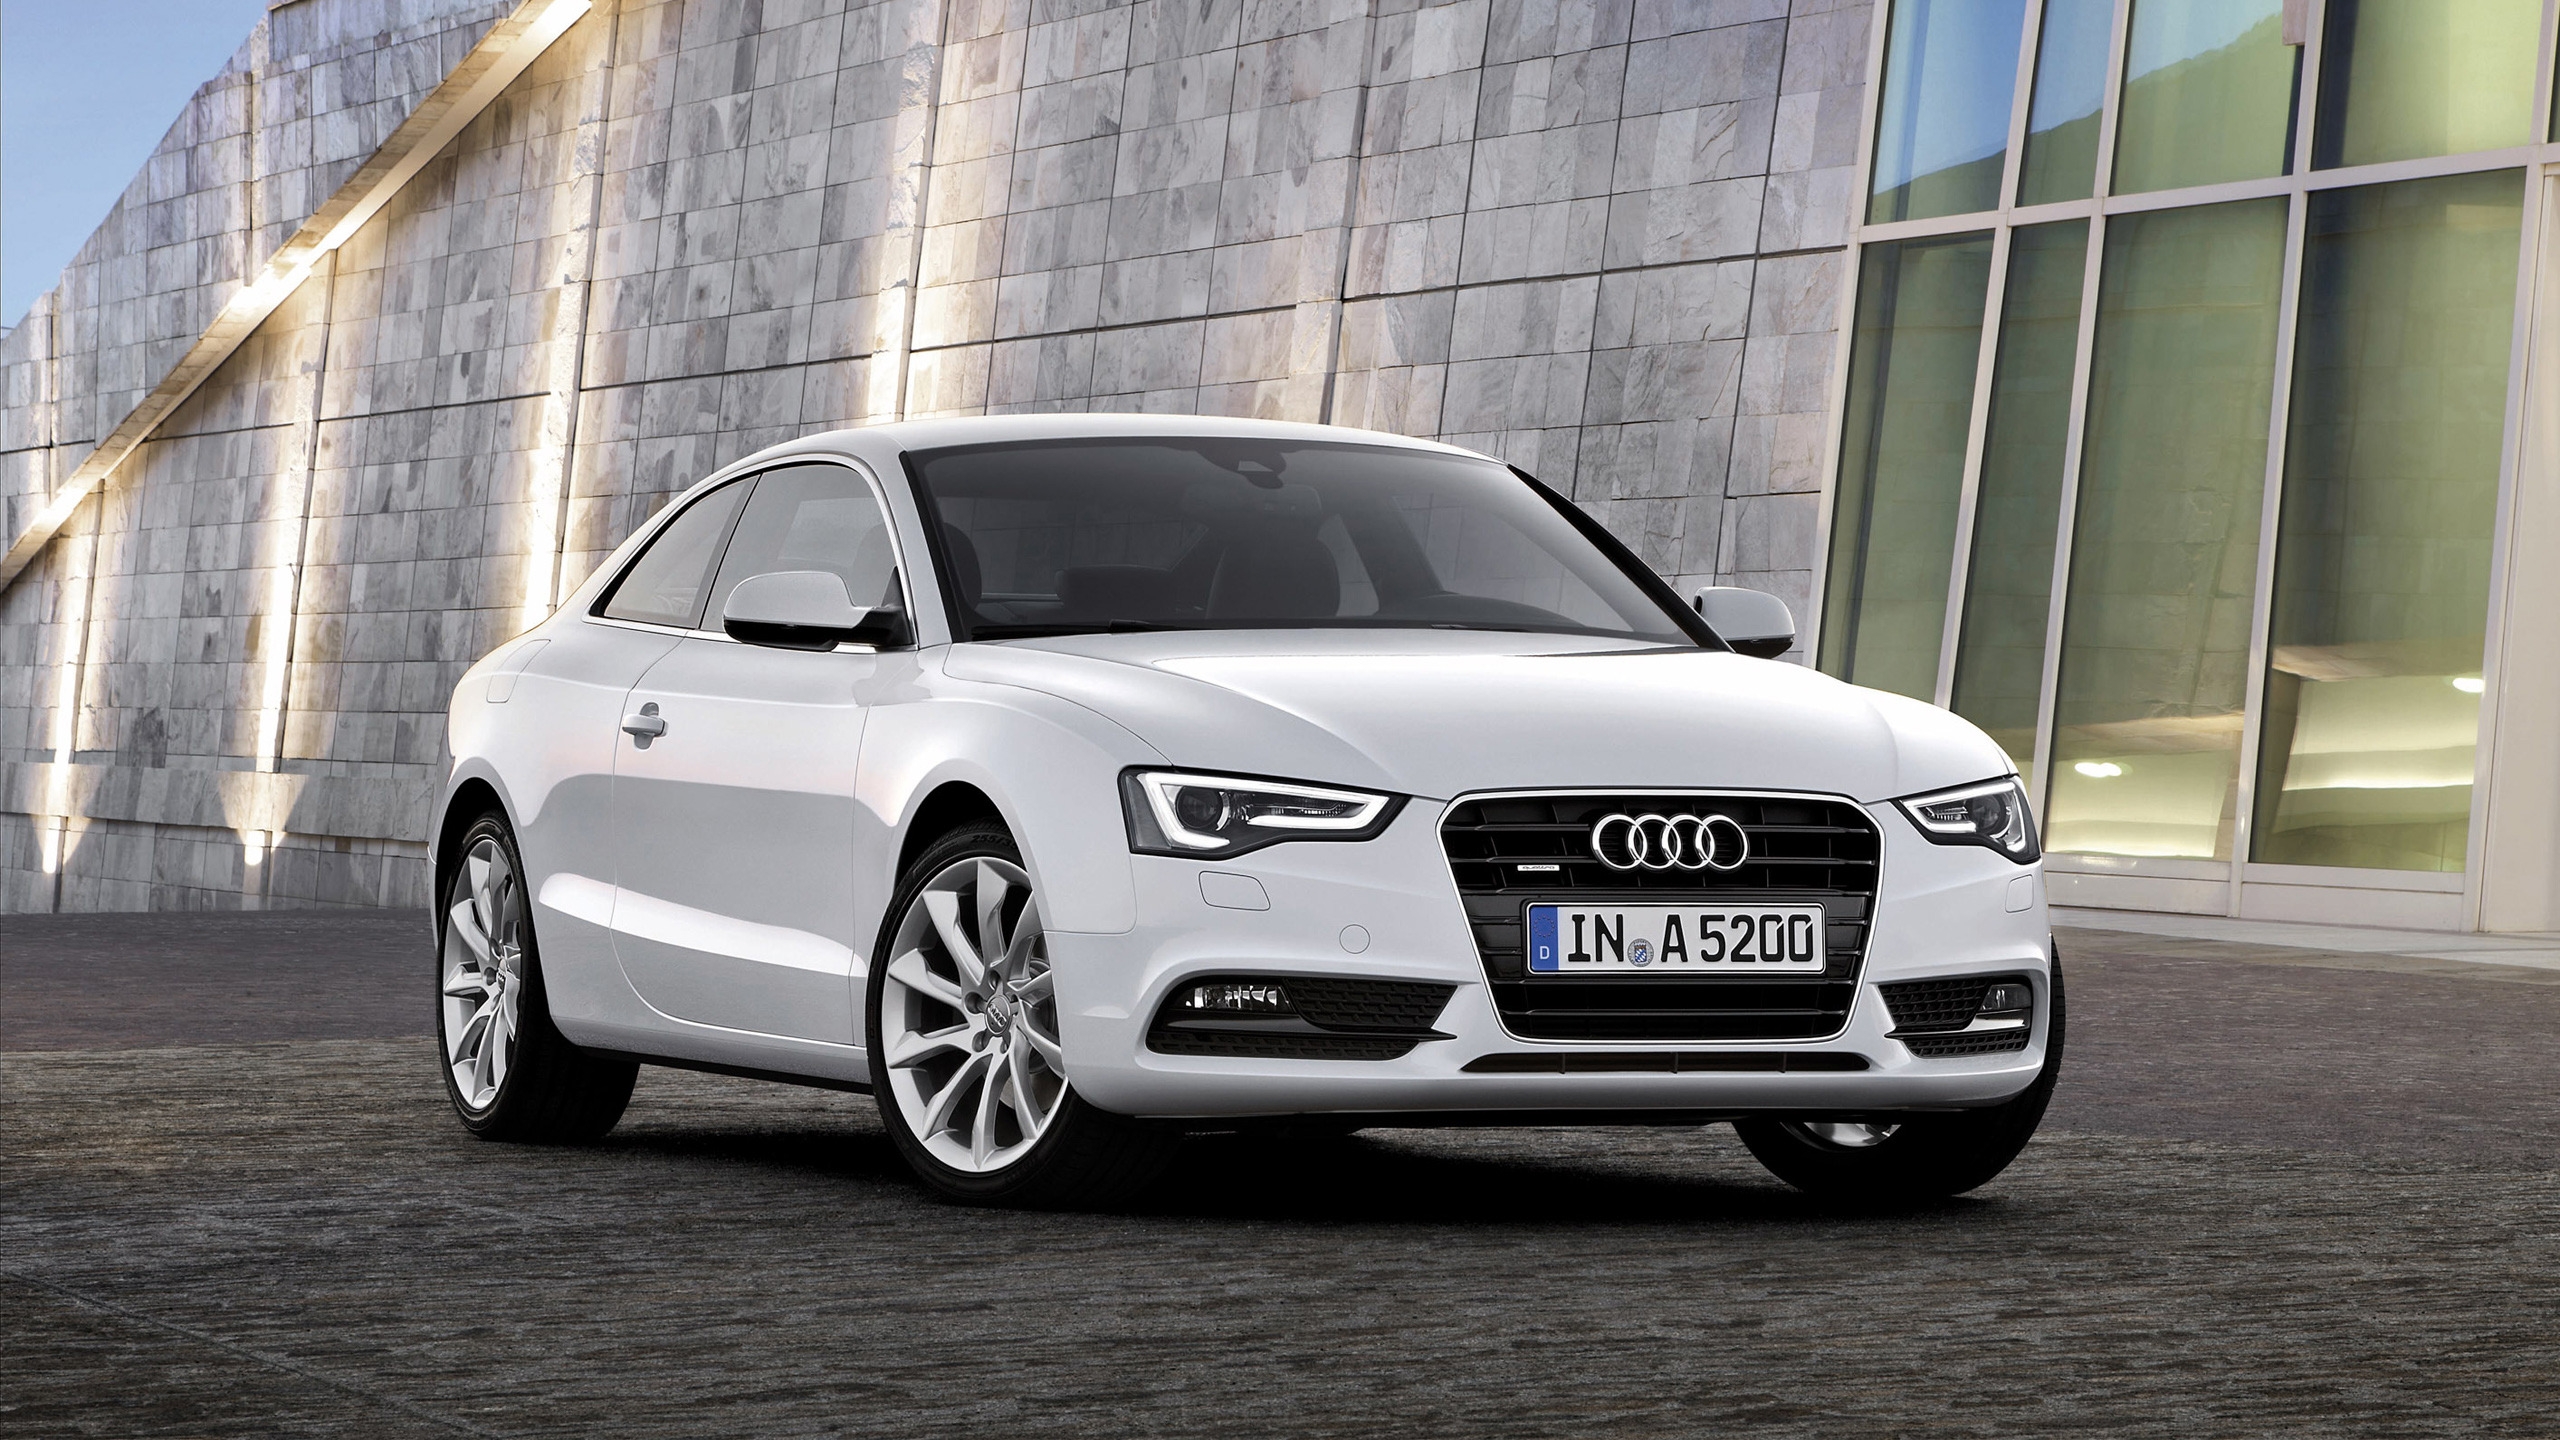 2012 Audi A5 Coupe for 2560x1440 HDTV resolution